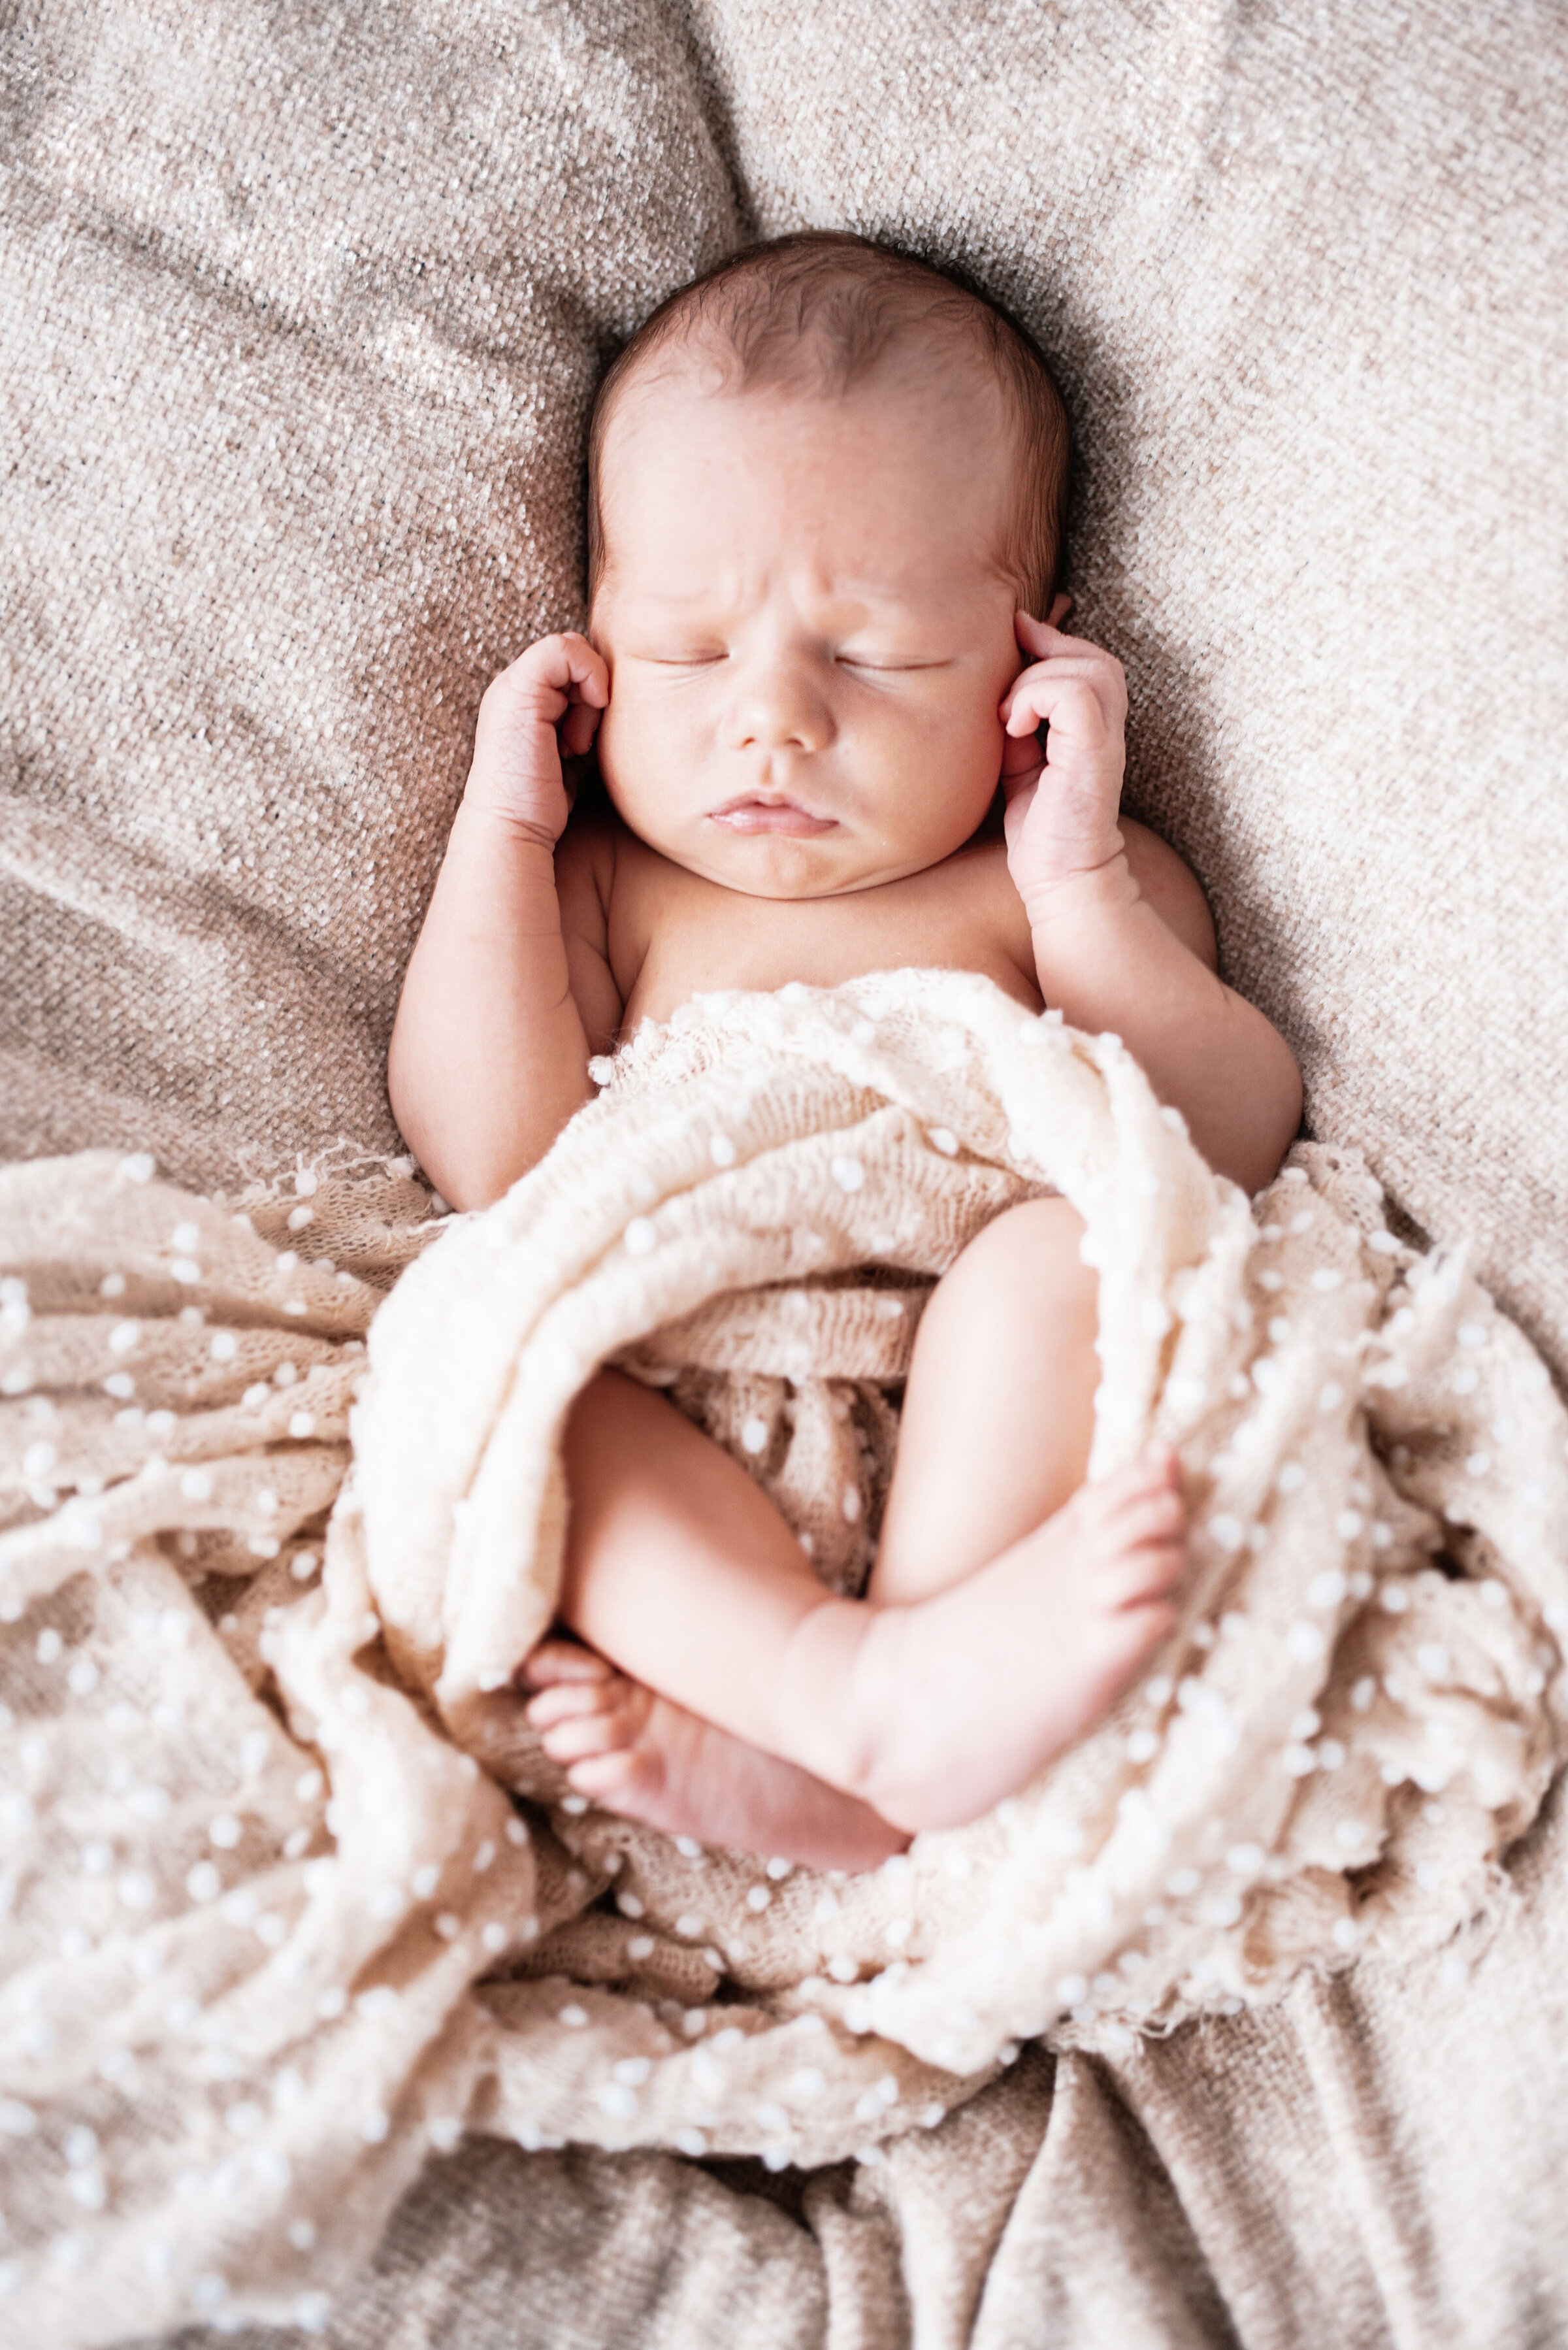 Newborn baby sleeping whilst wrapped in blankets